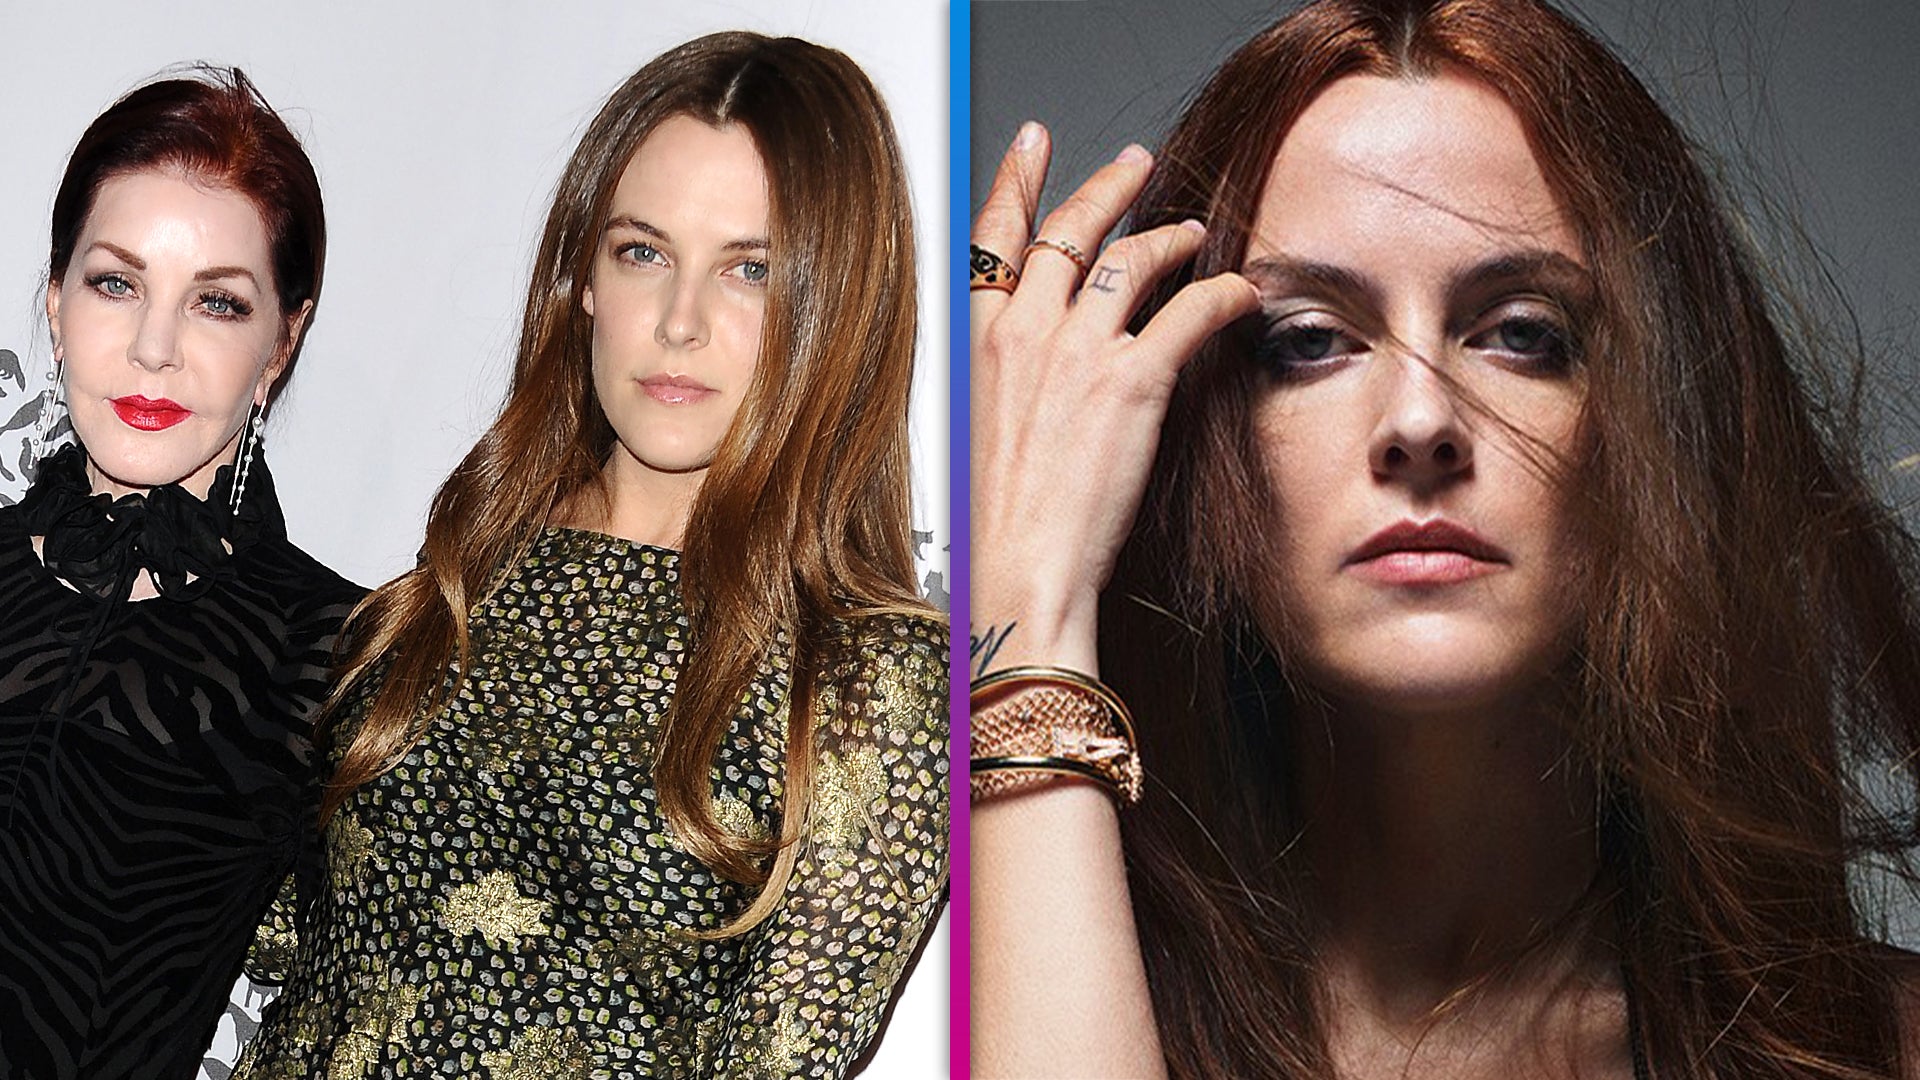 The pained life of Riley Keough, Lisa Marie Presley's daughter